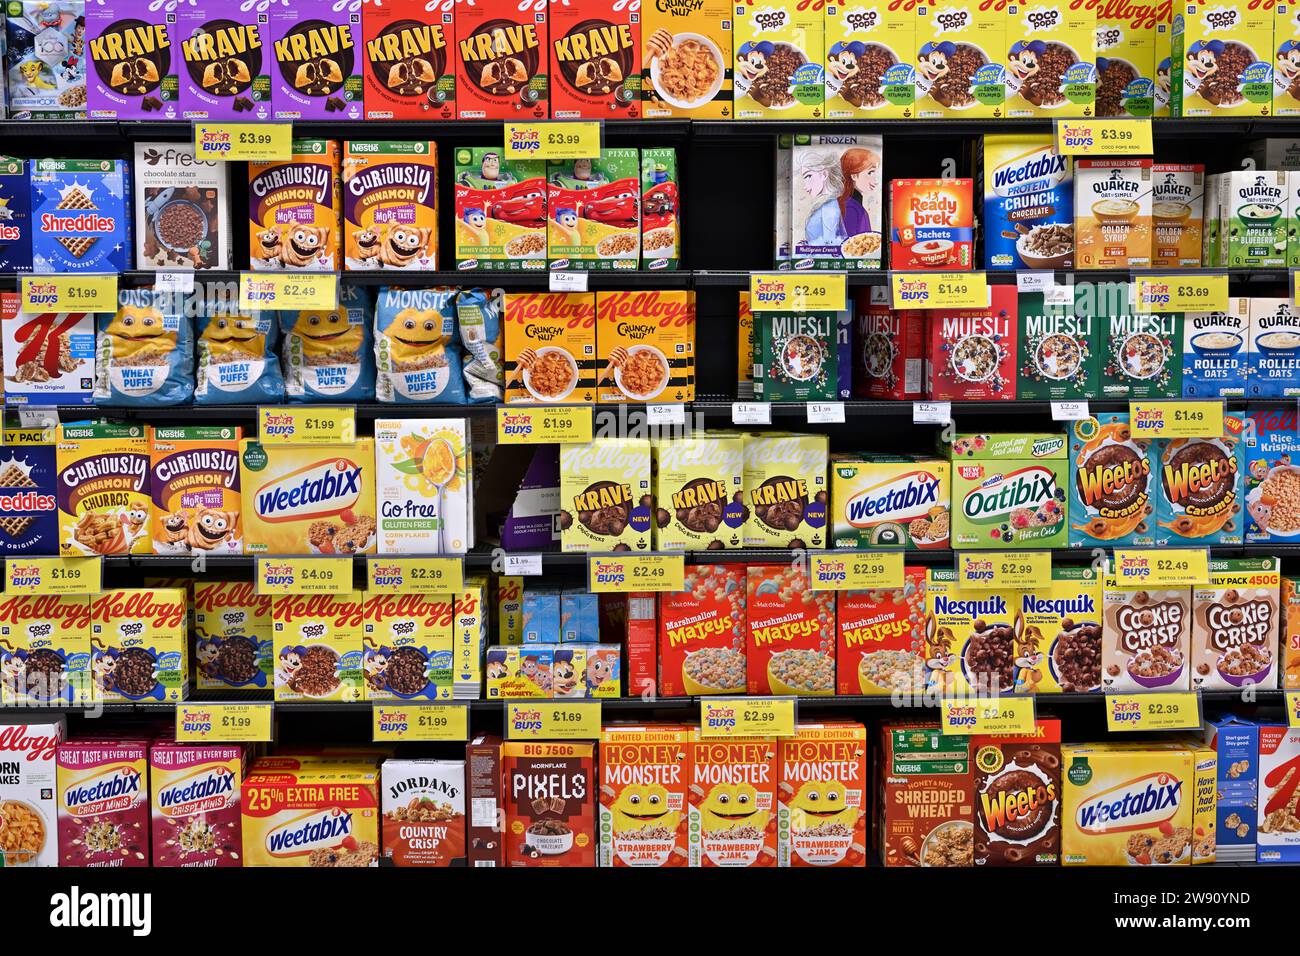 Variety of cereal boxes on supermarket shelves Stock Photo